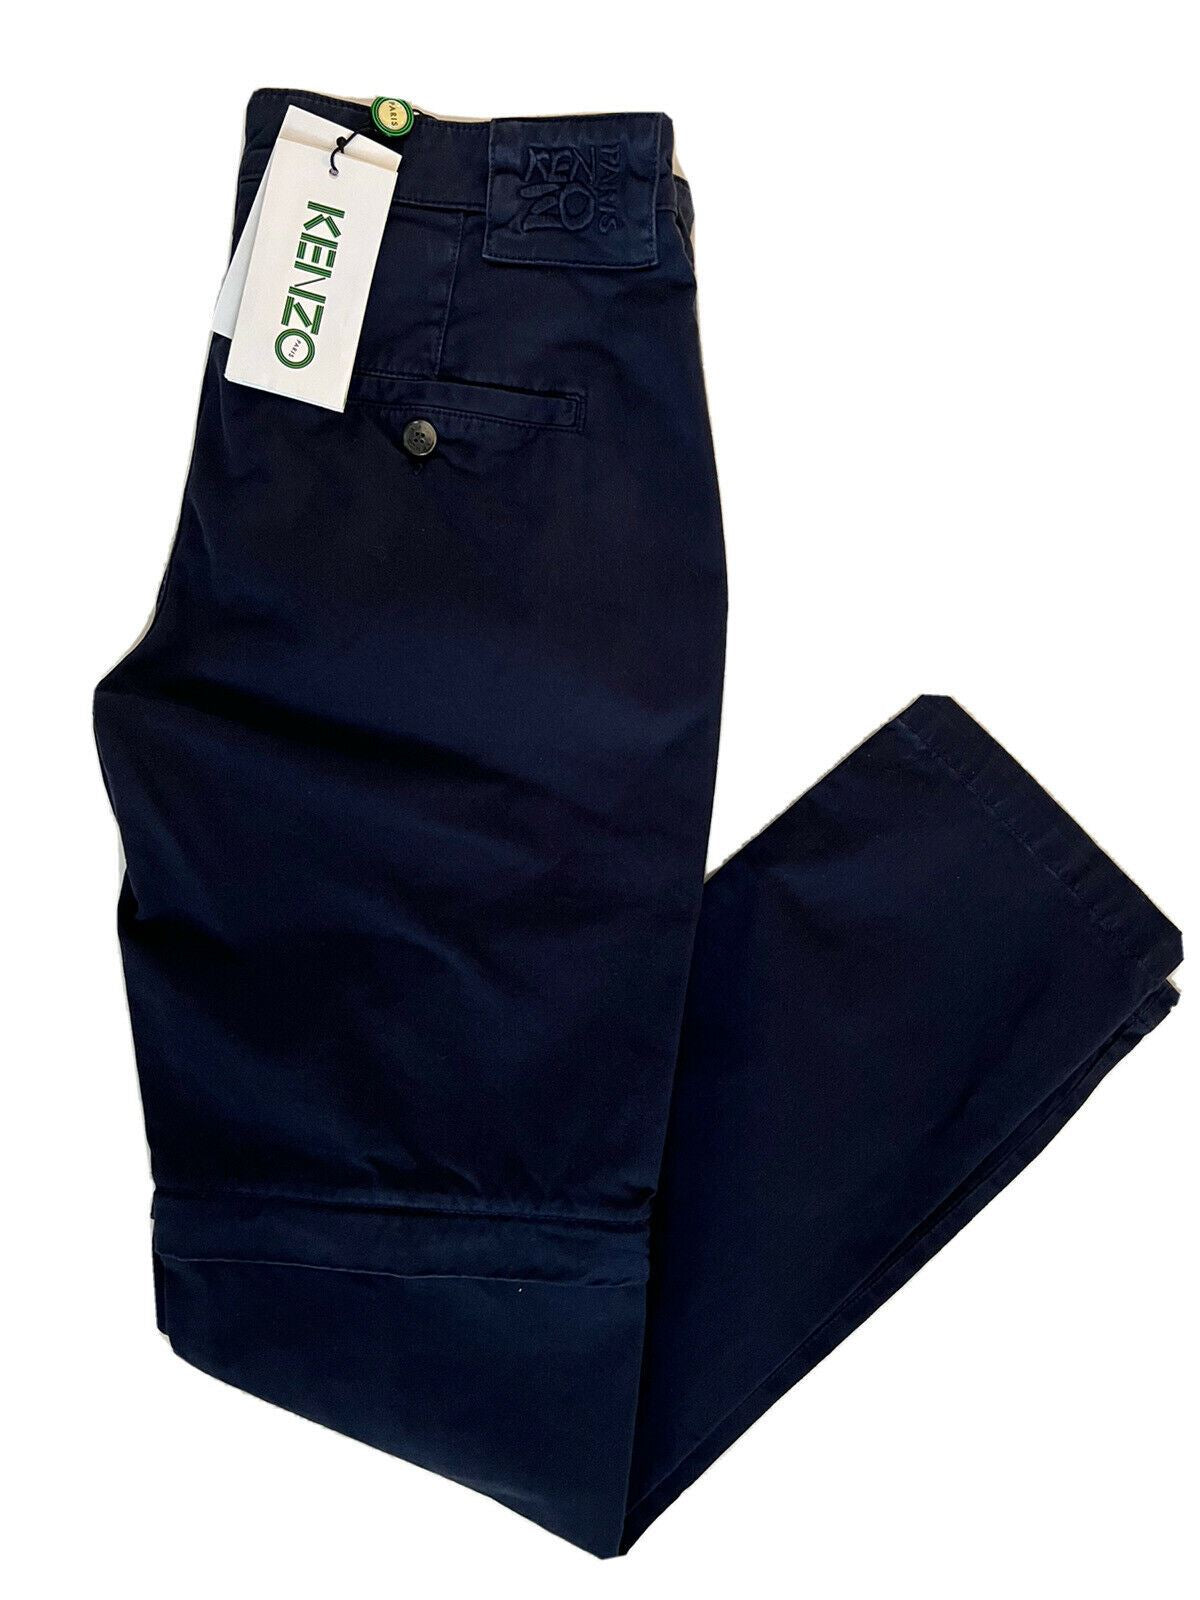 NWT $280 Kenzo Men's Midnight Blue Zip Off Casual Pants Size 28 US (44 Euro)